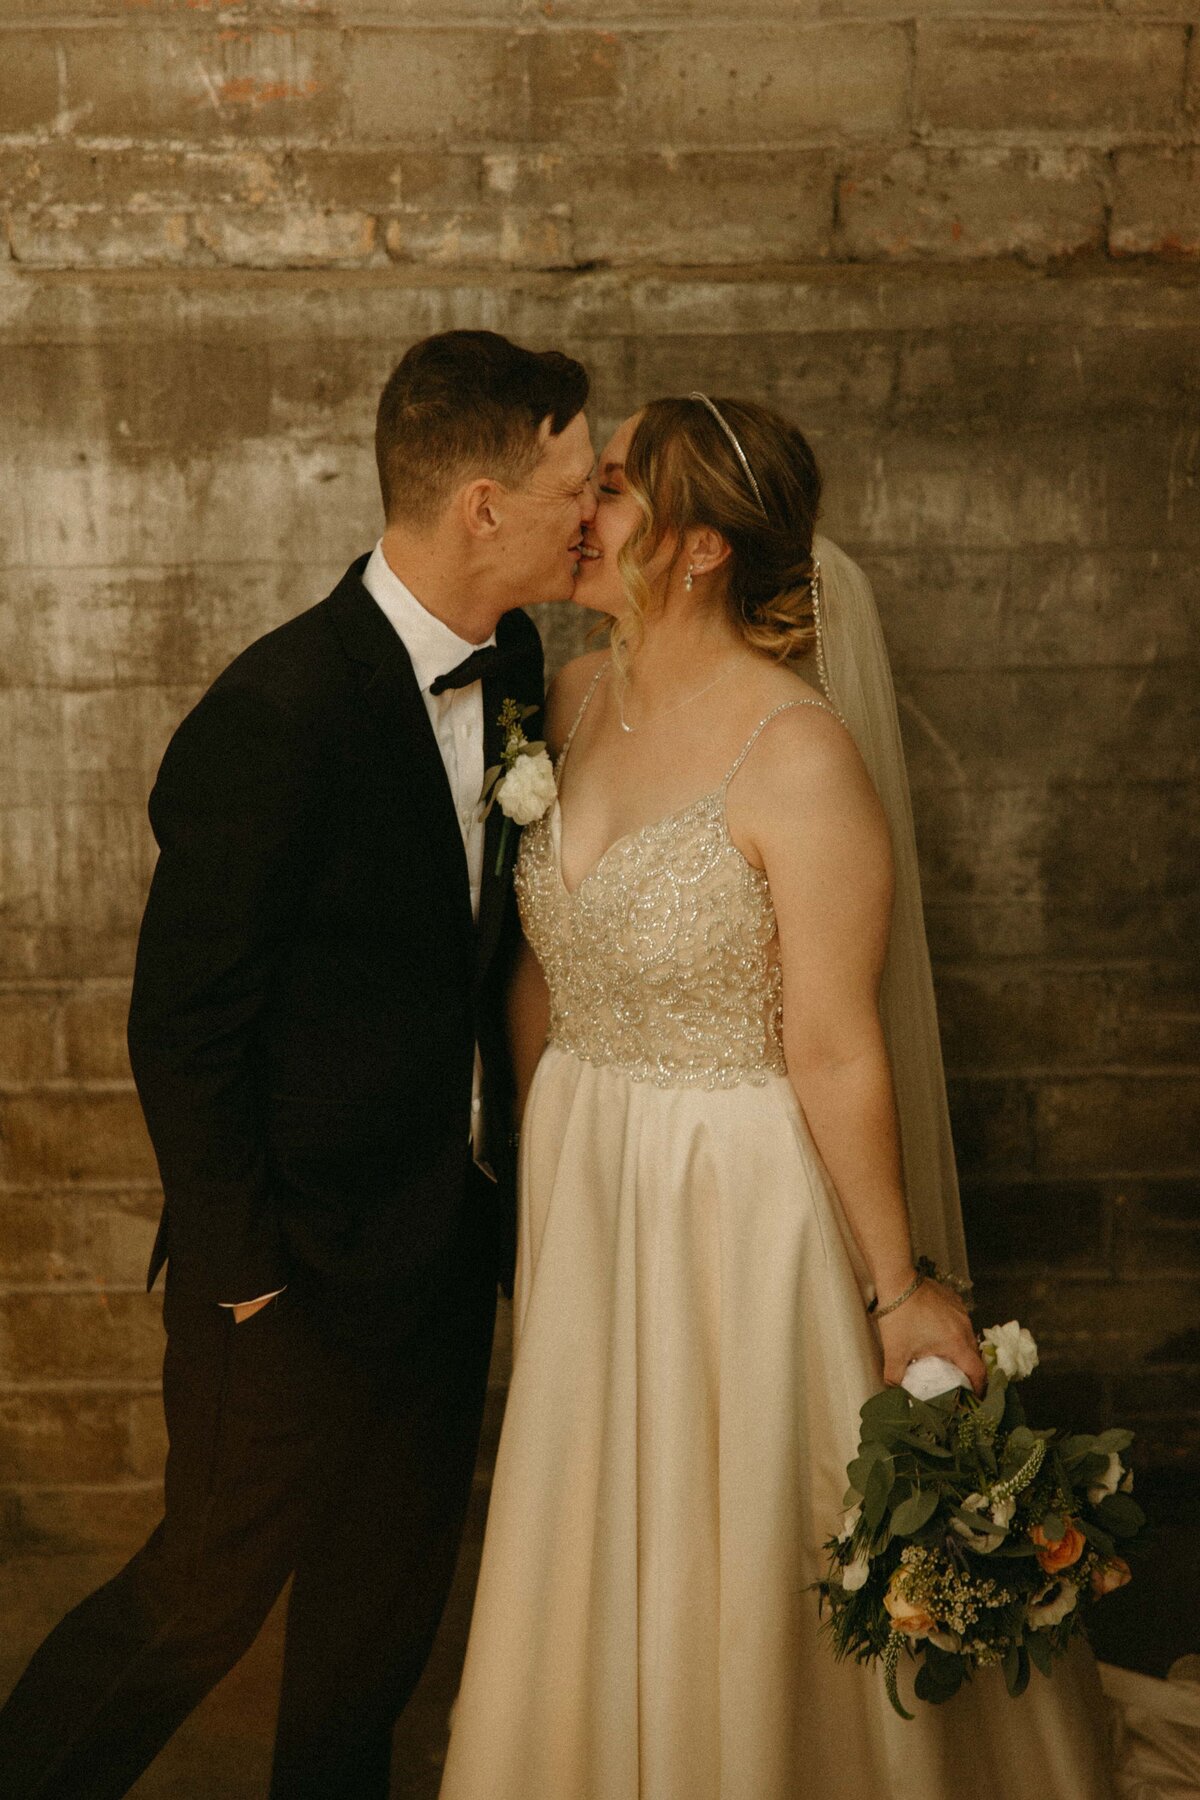 A bride and groom touching foreheads, smiling, in an intimate pose against a brick backdrop at an Iowa wedding, the bride holding a bouquet.